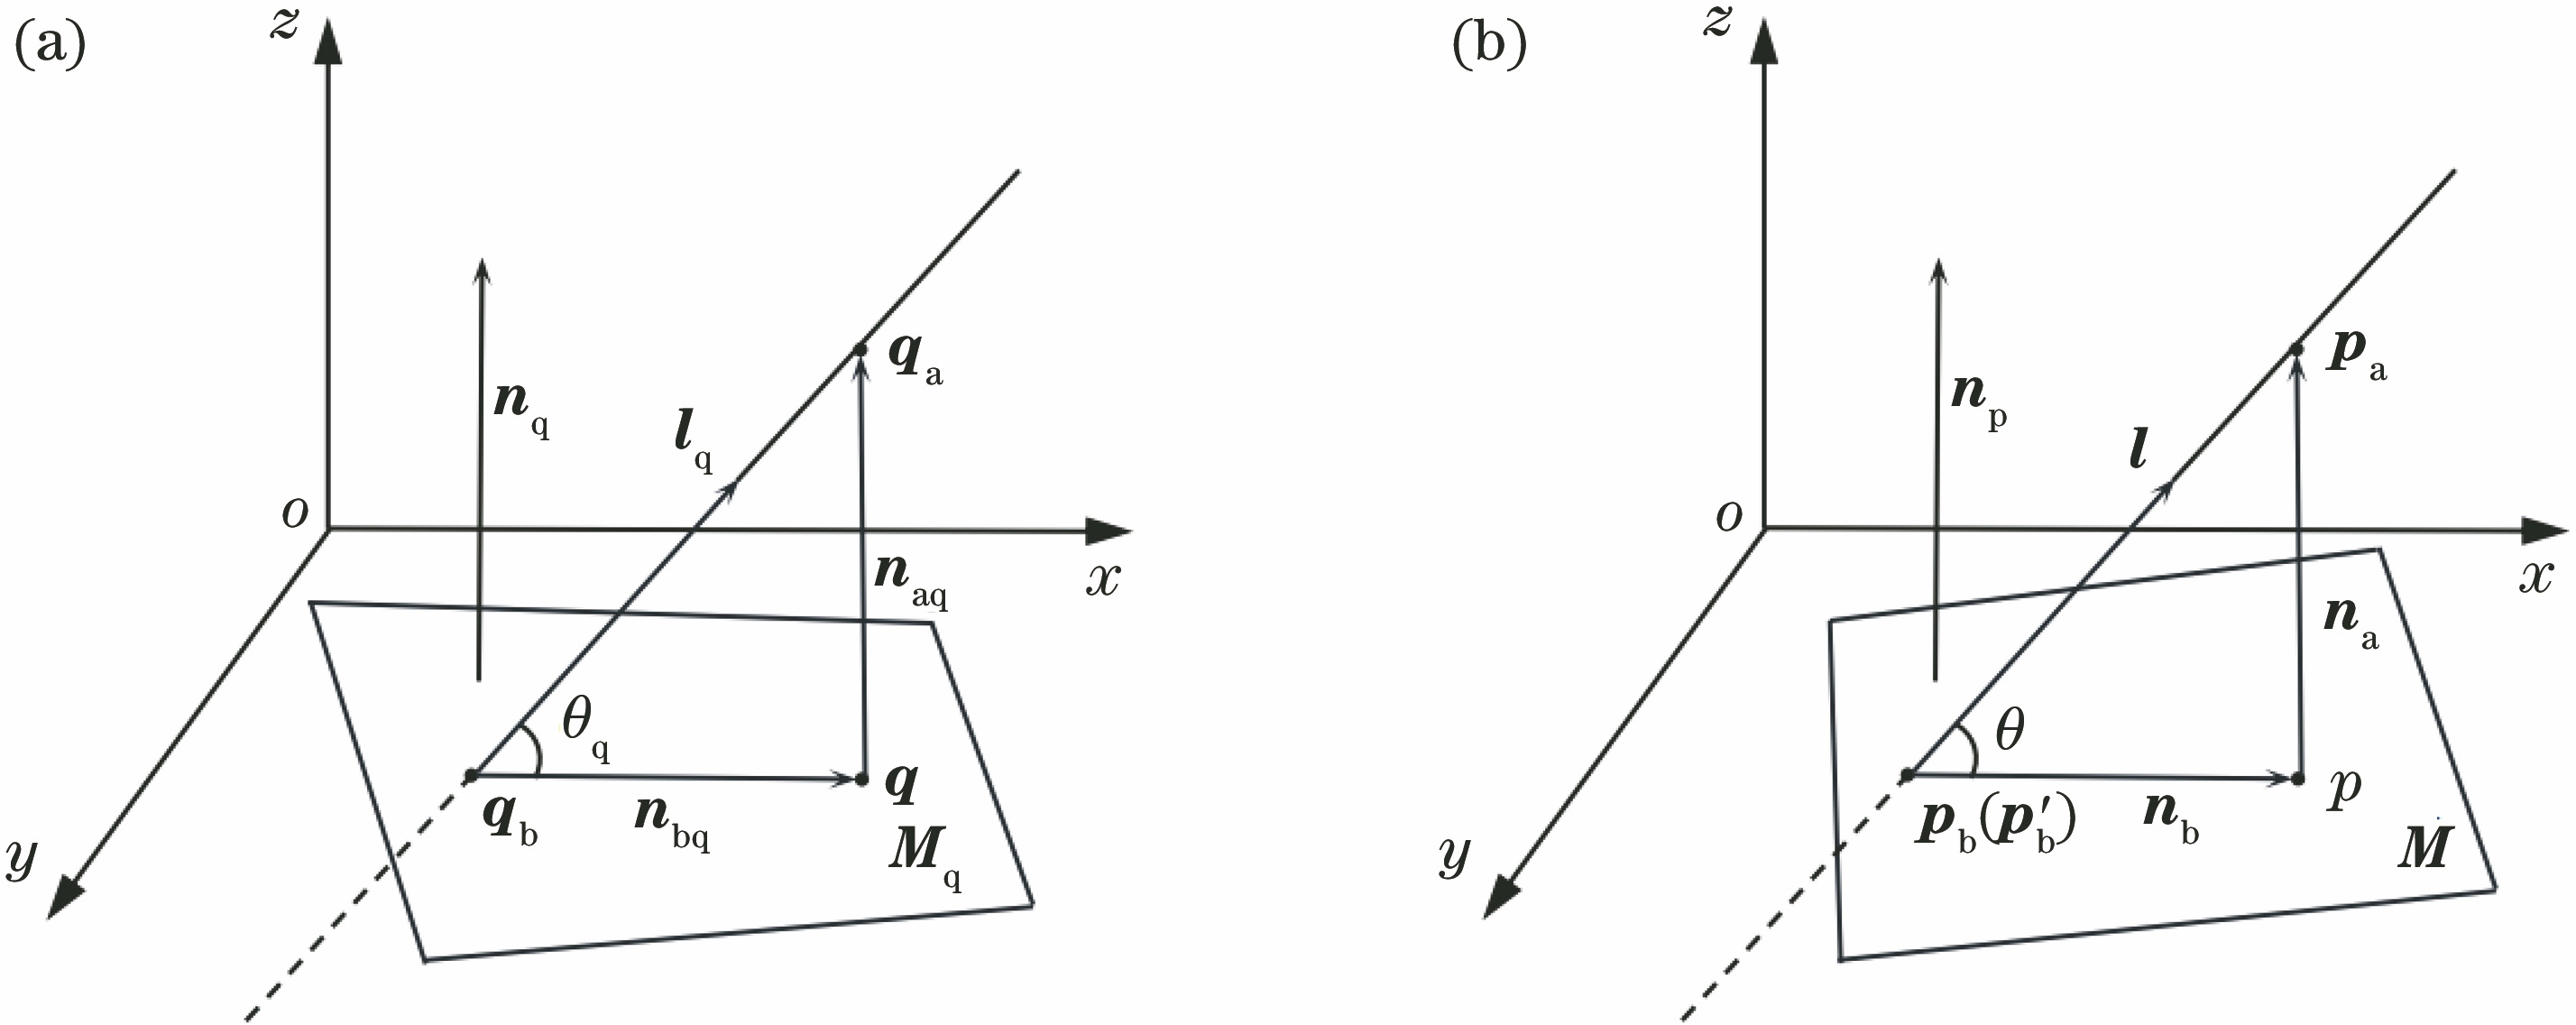 Spatial geometric relation between straight line and plane. (a) Selected line-planar features in un-registered point cloud; (b) selected line-planar features in target point cloud